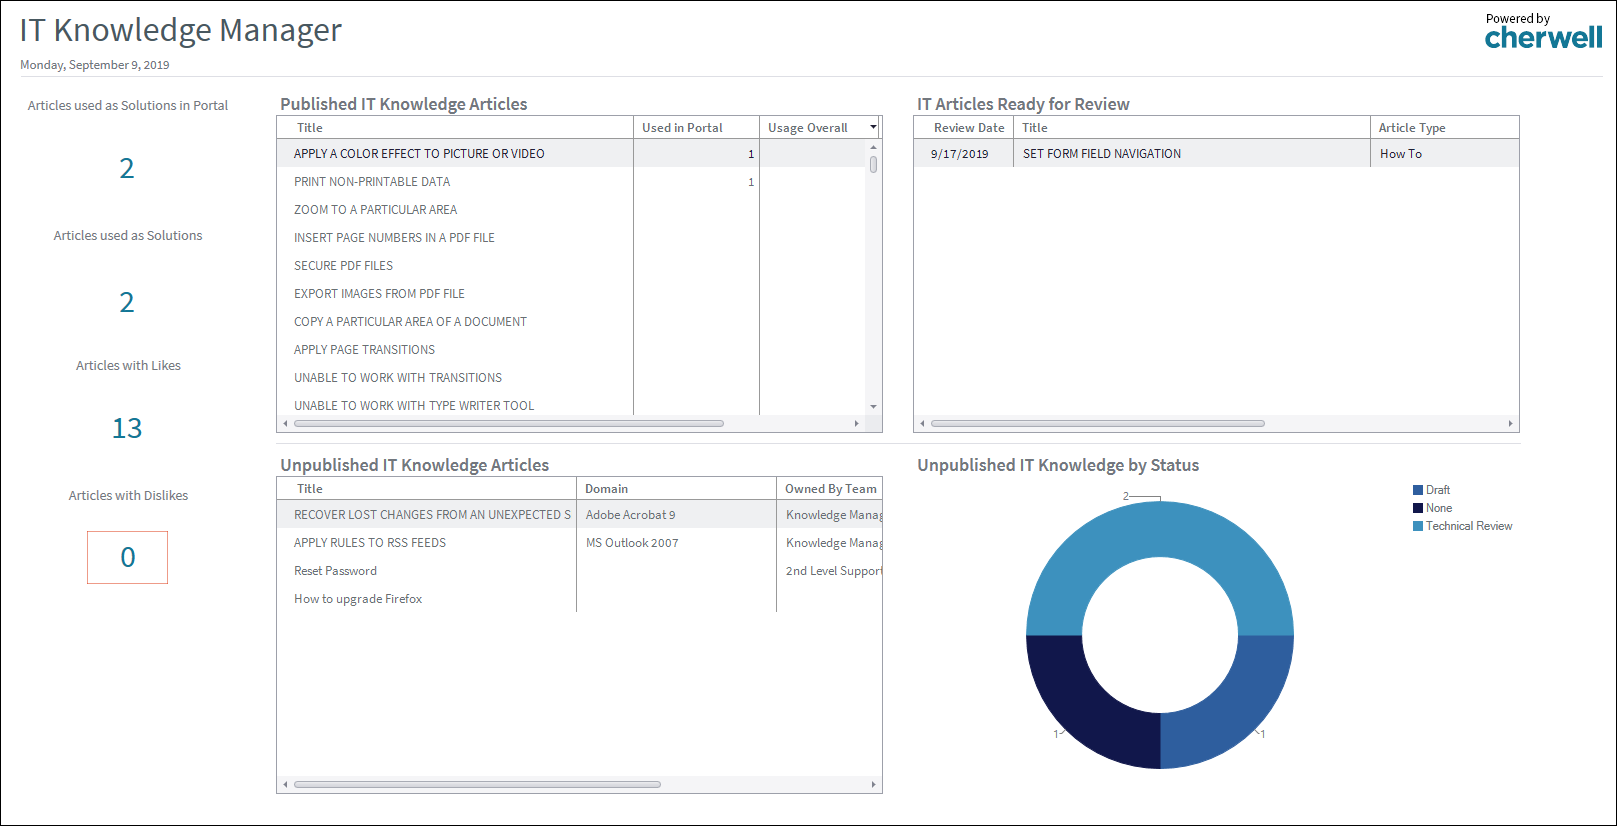 IT Knowledge Manager Dashboard